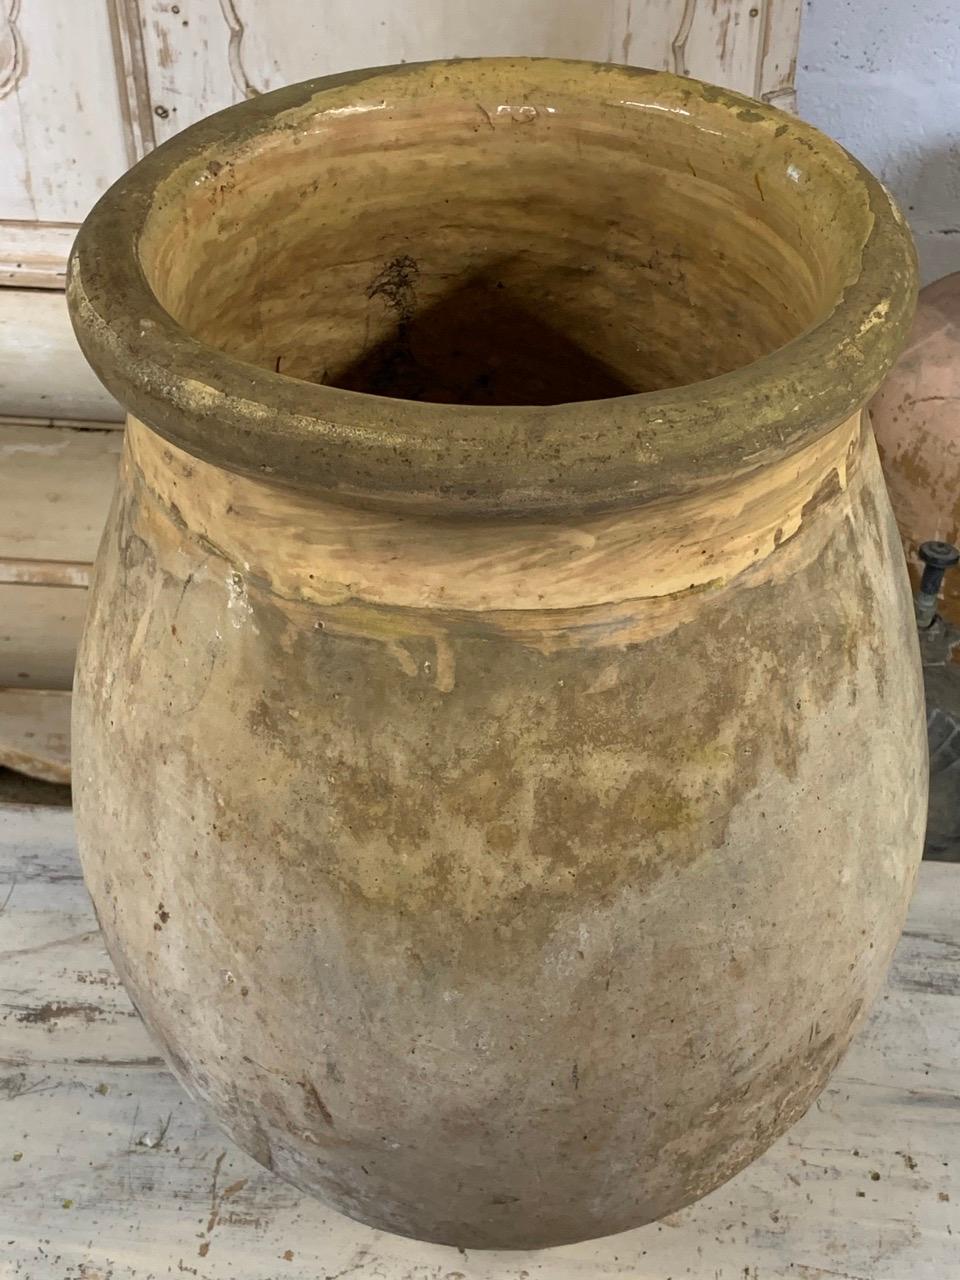 A lovely 19th century Biot jar from the south of France. These were originally used to store olives and olive oil but now make beautiful decorative garden features or could also be used indoors as a vase.
Please contact us for an accurate shipping